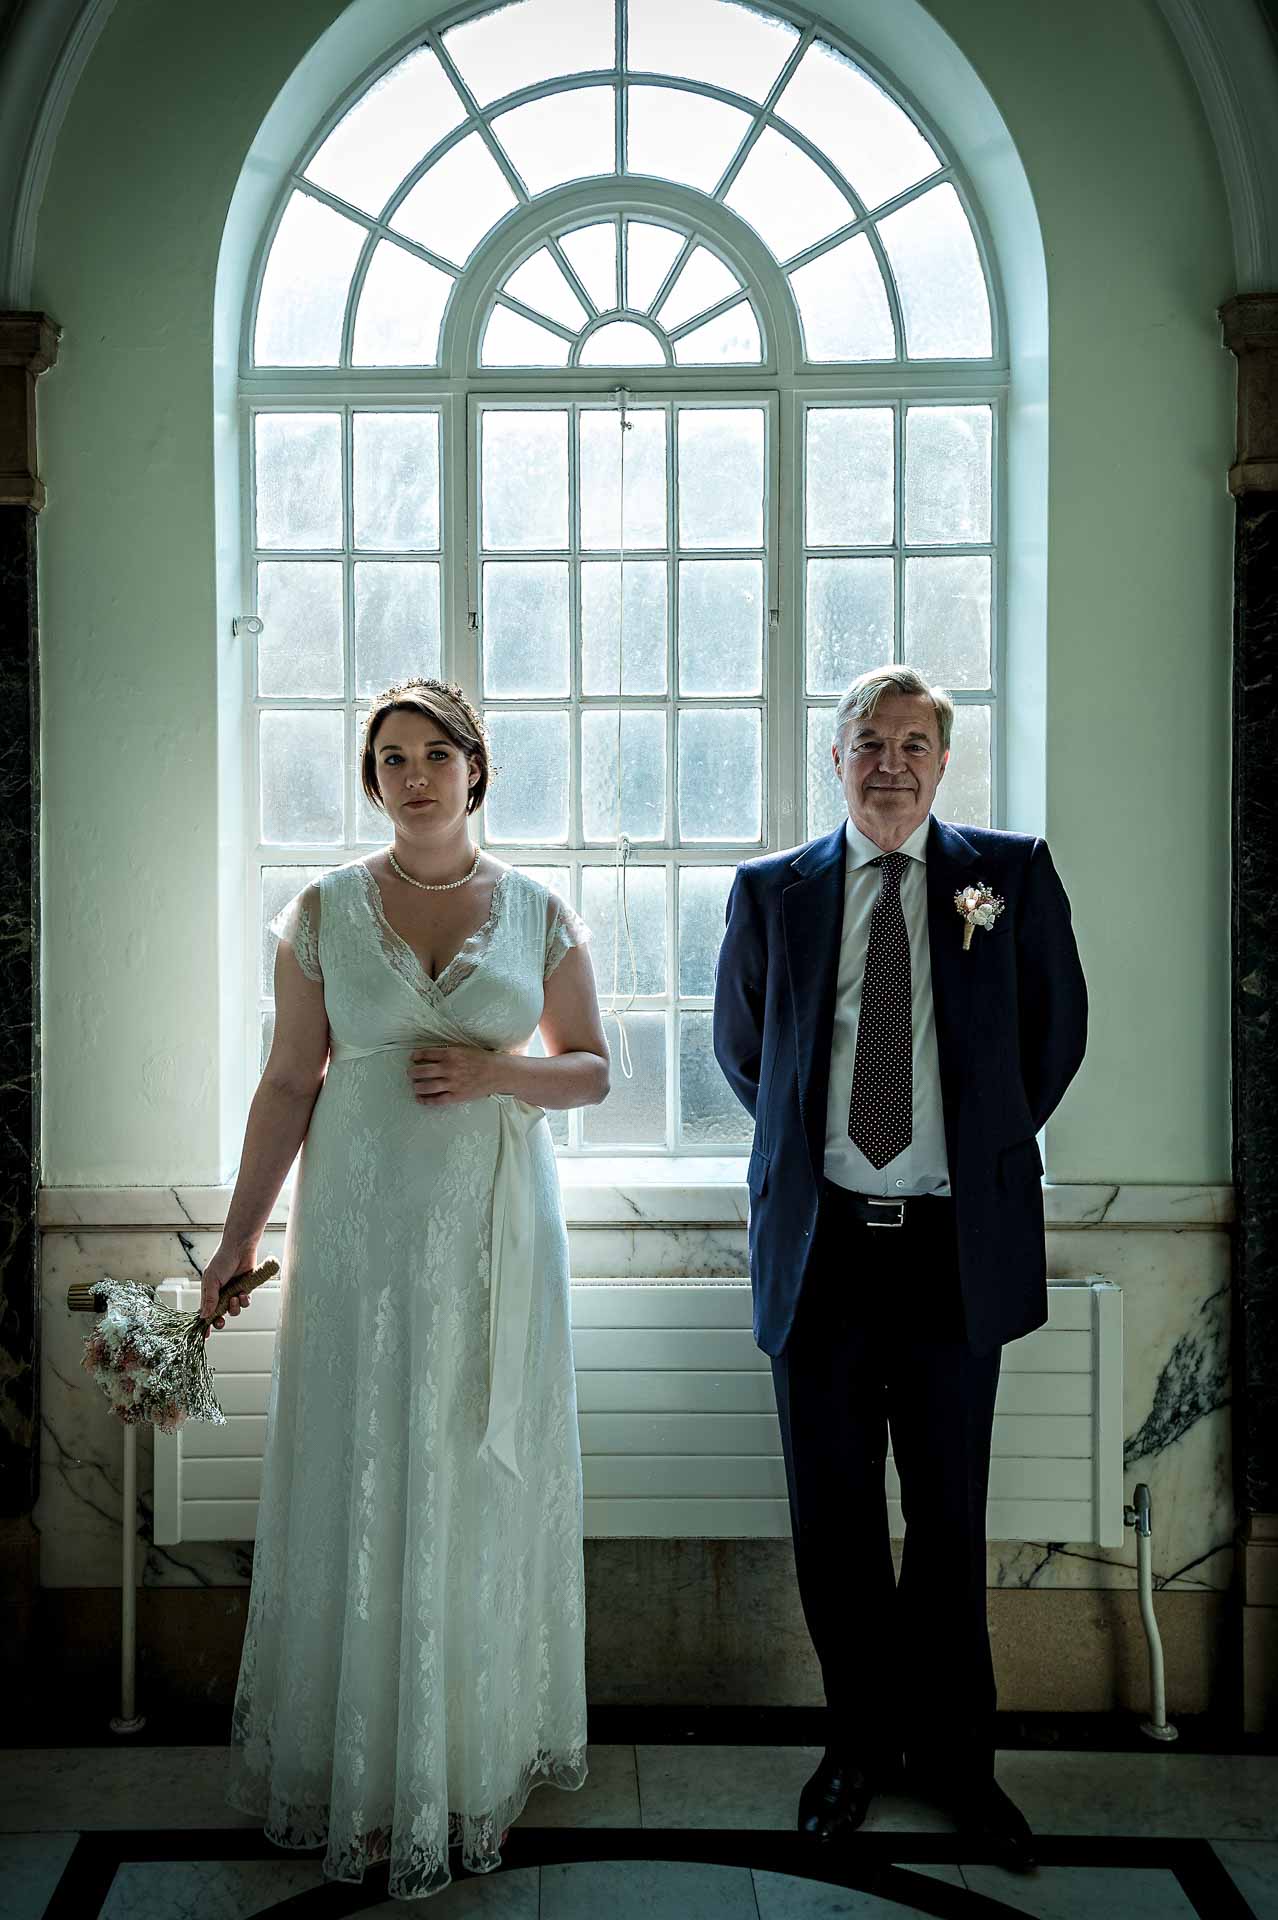 Bride with Father Waiting Infront of Large Arched Windows